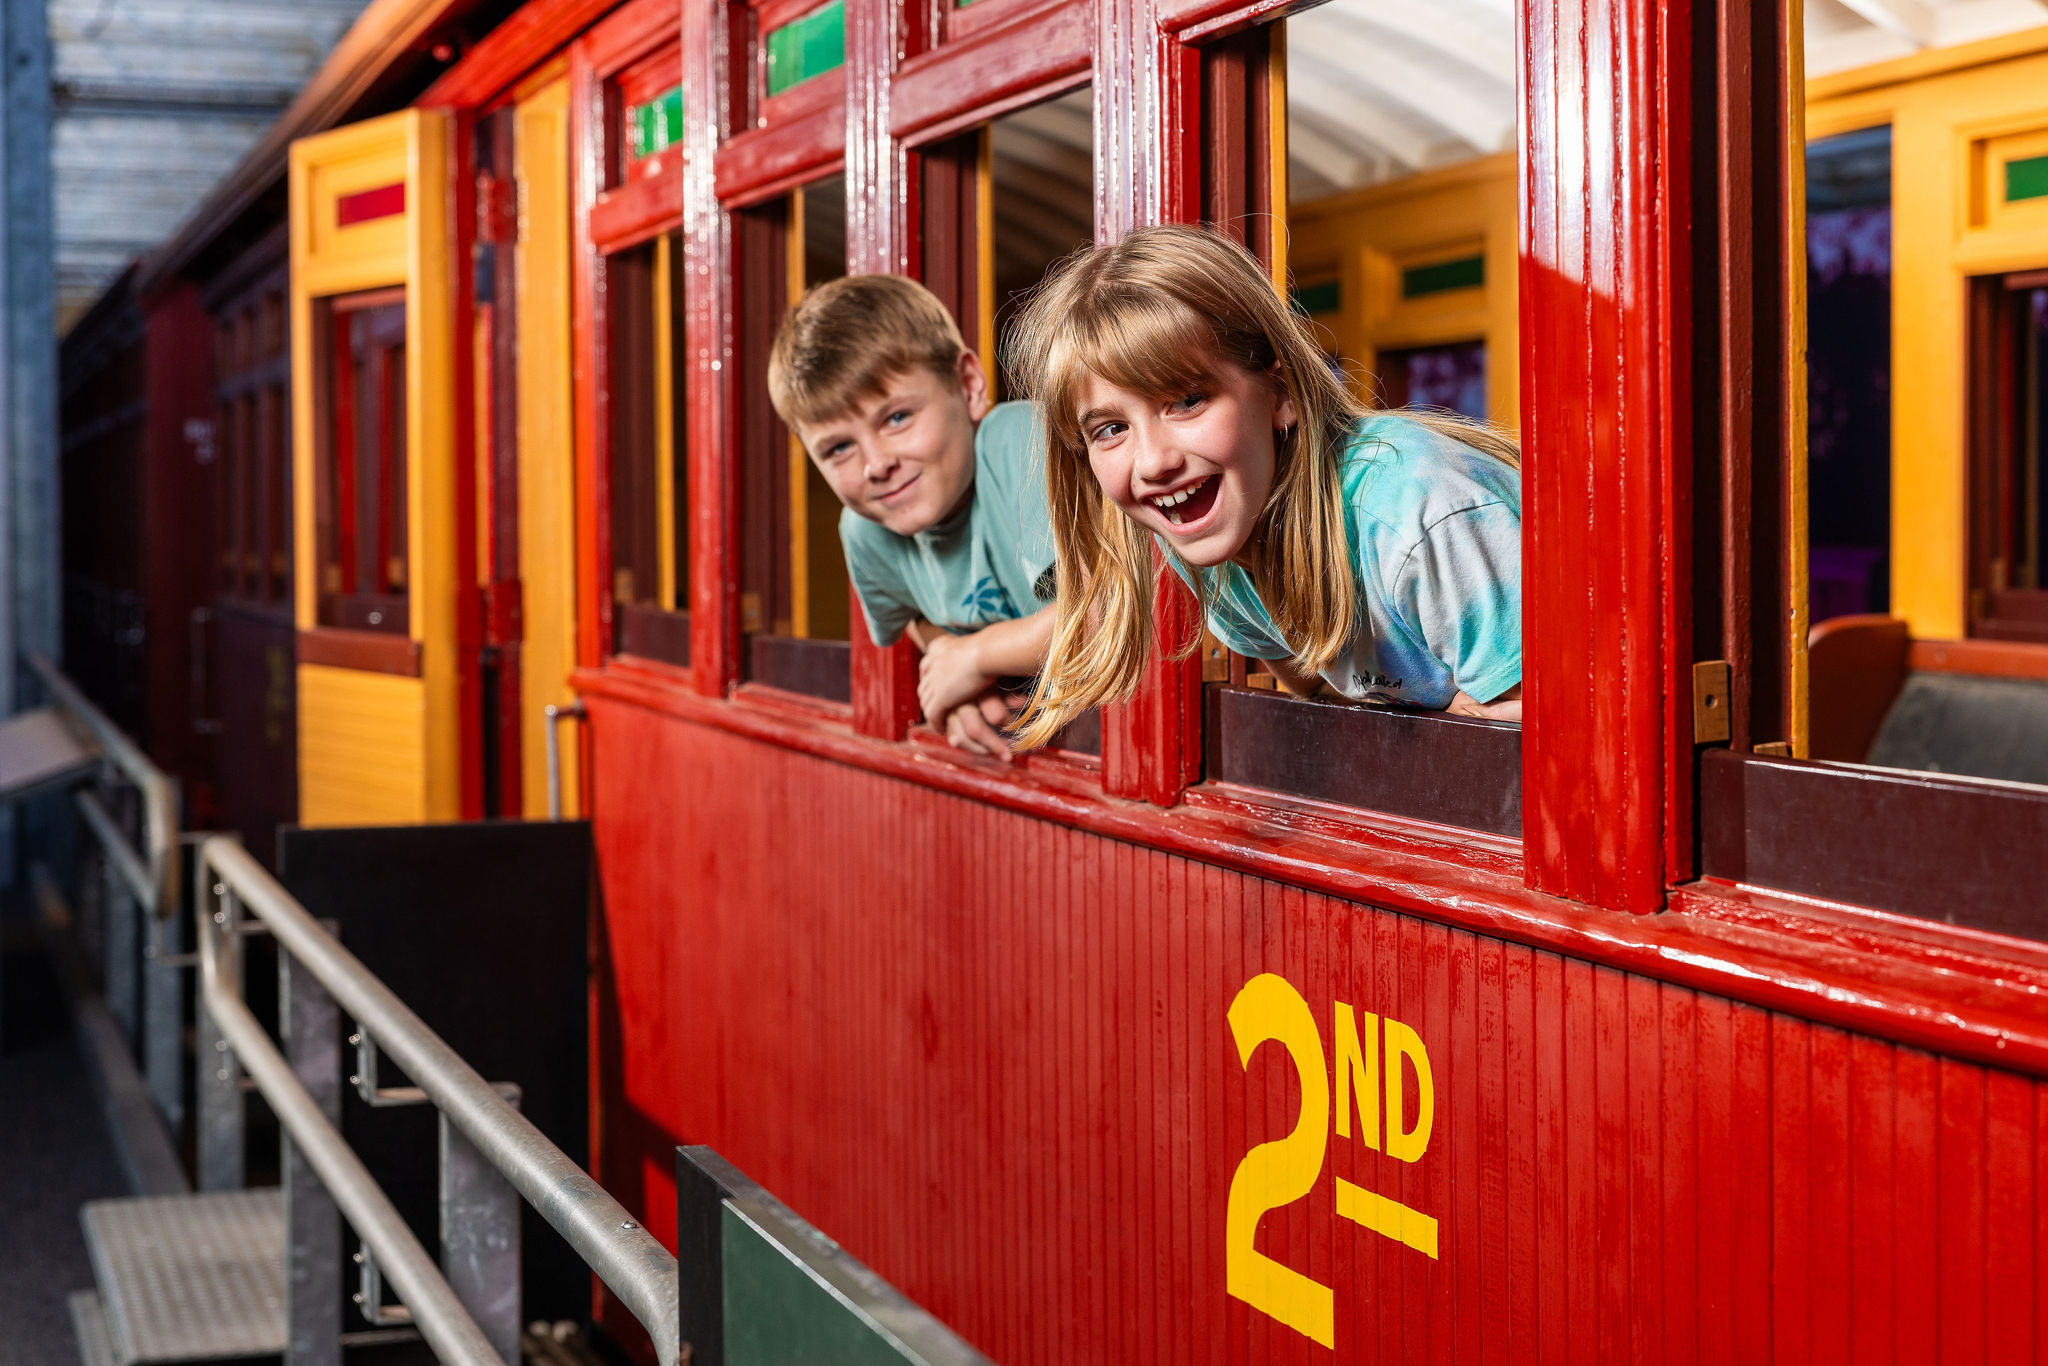 Rail Through Time: A Kids Adventure will be at Queensland Museum Rail Workshops these school holidays